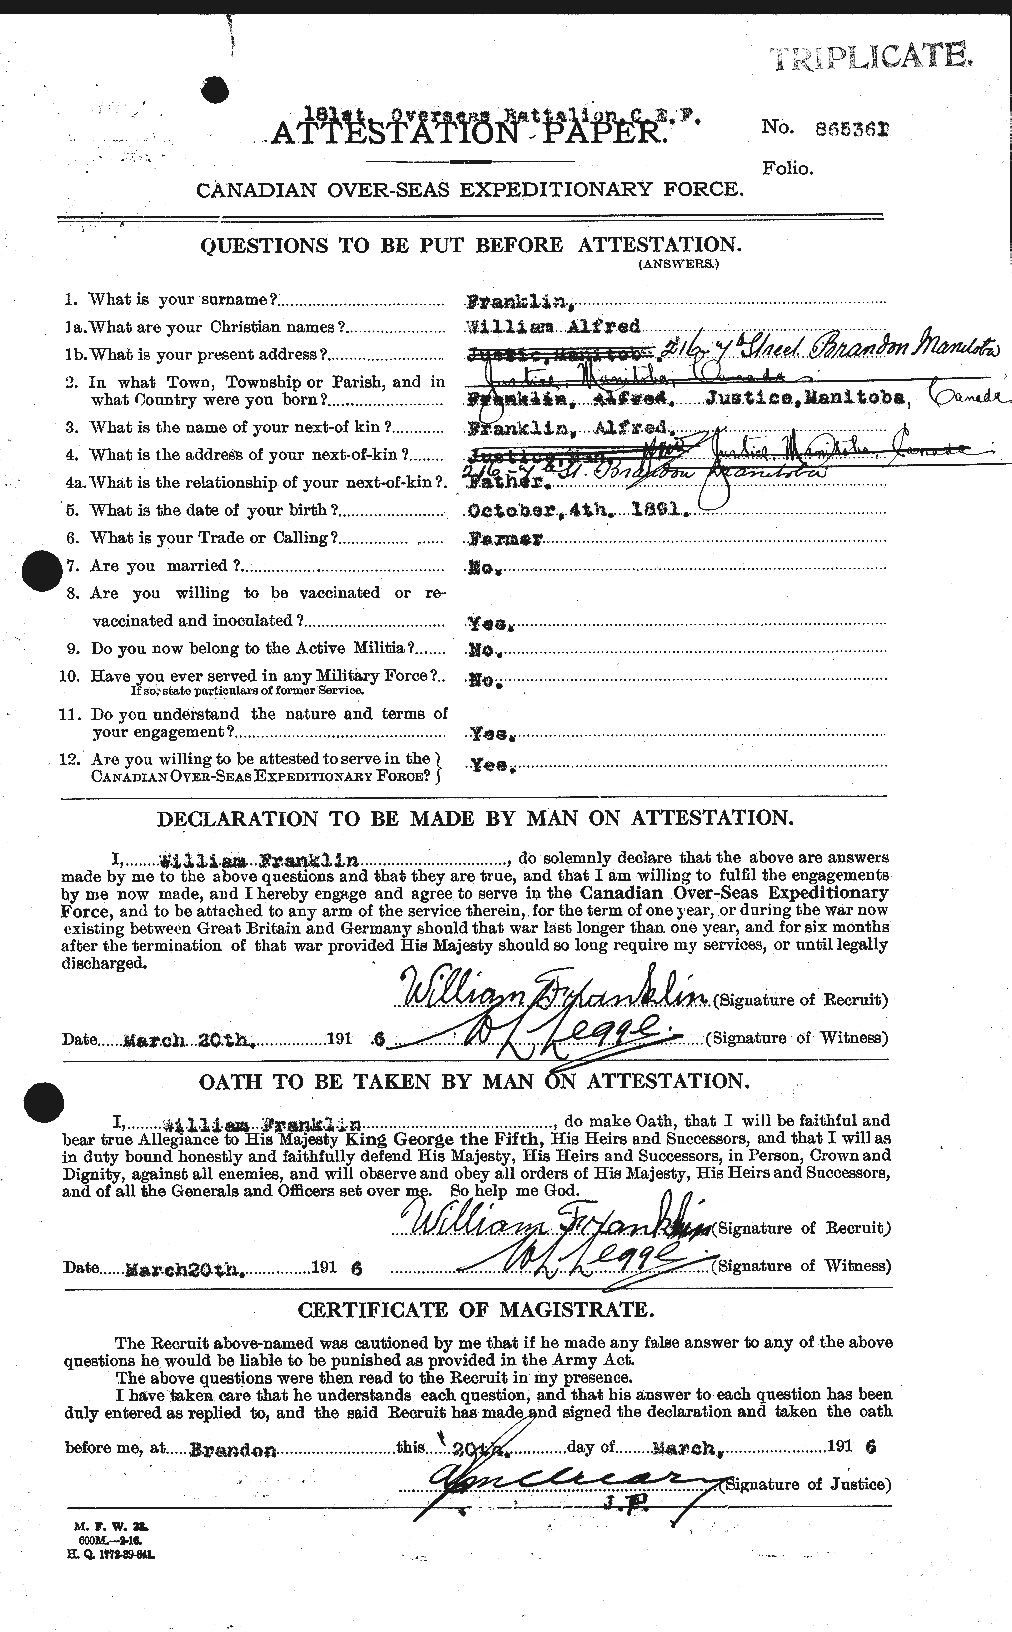 Personnel Records of the First World War - CEF 333951a